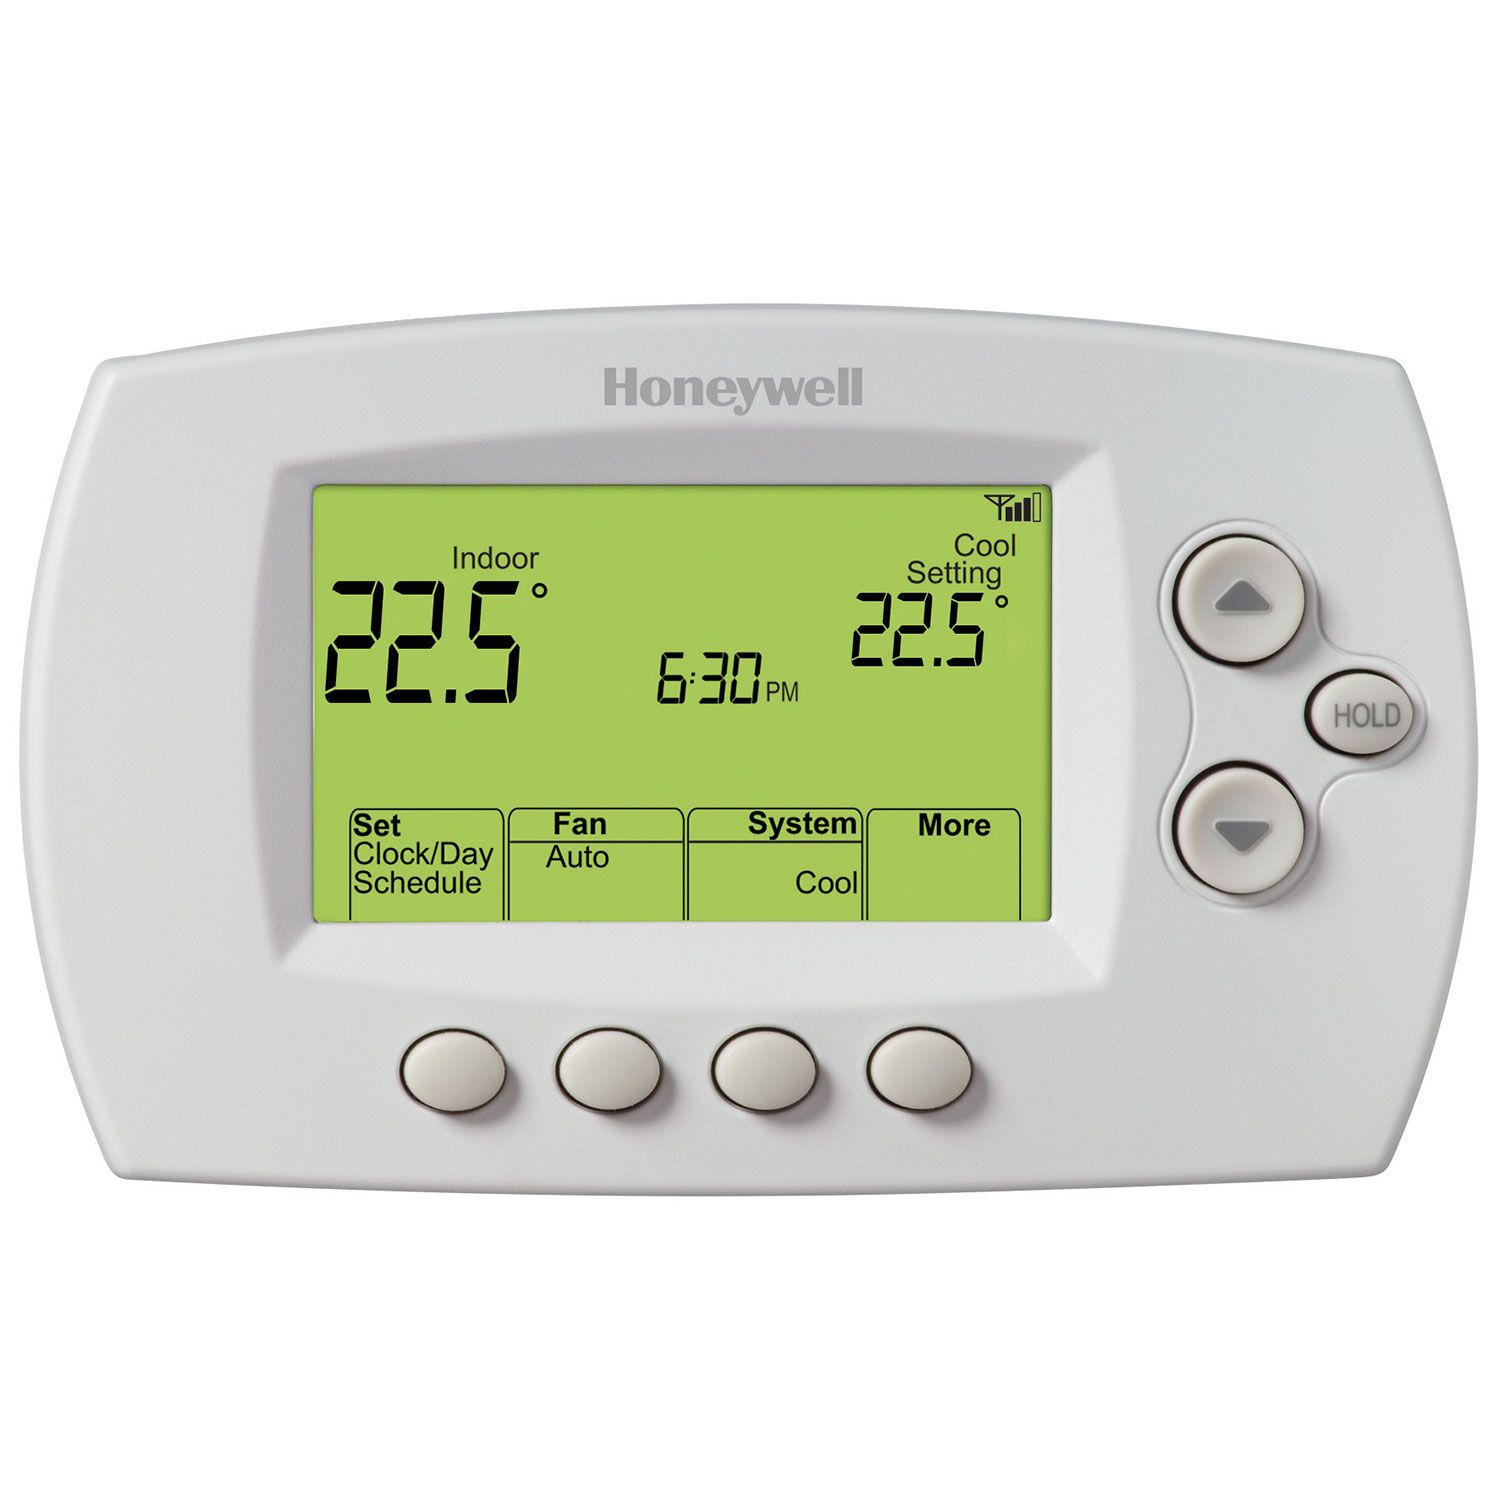 Honeywell RTH6580WF Smart Thermostat, No Hub Required - image 1 of 2